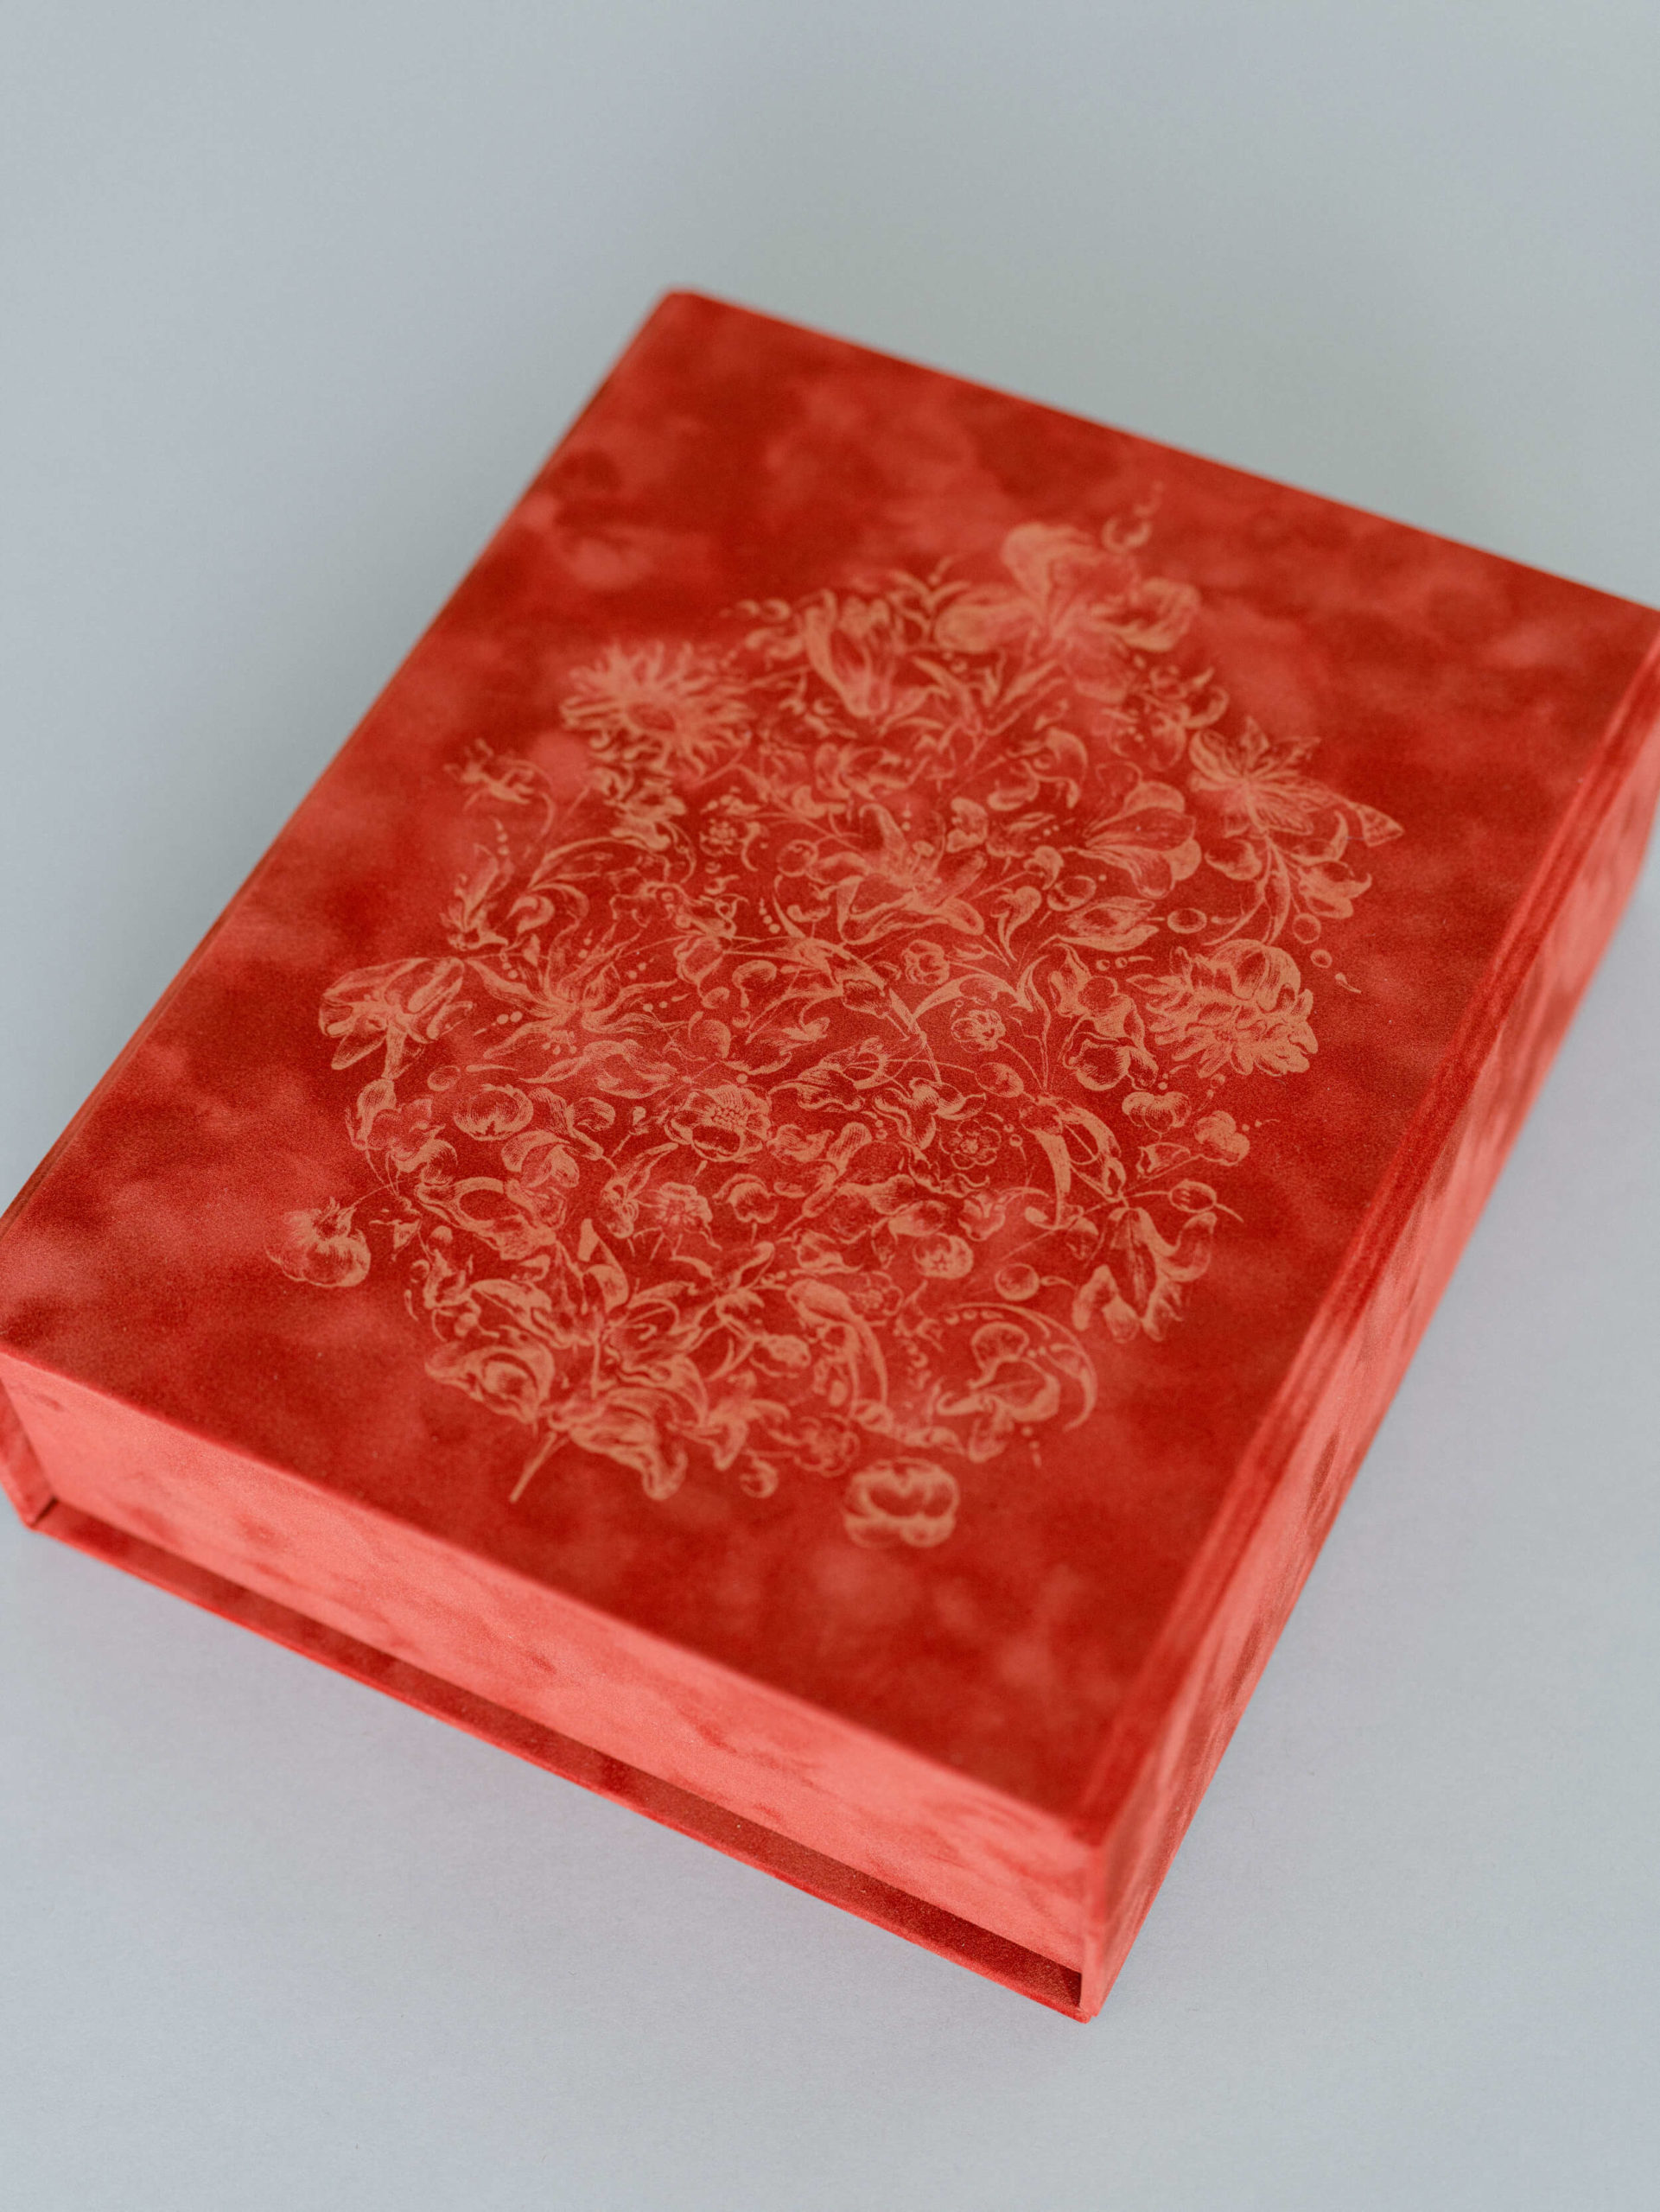 custom laser etching on red book cloth album cover